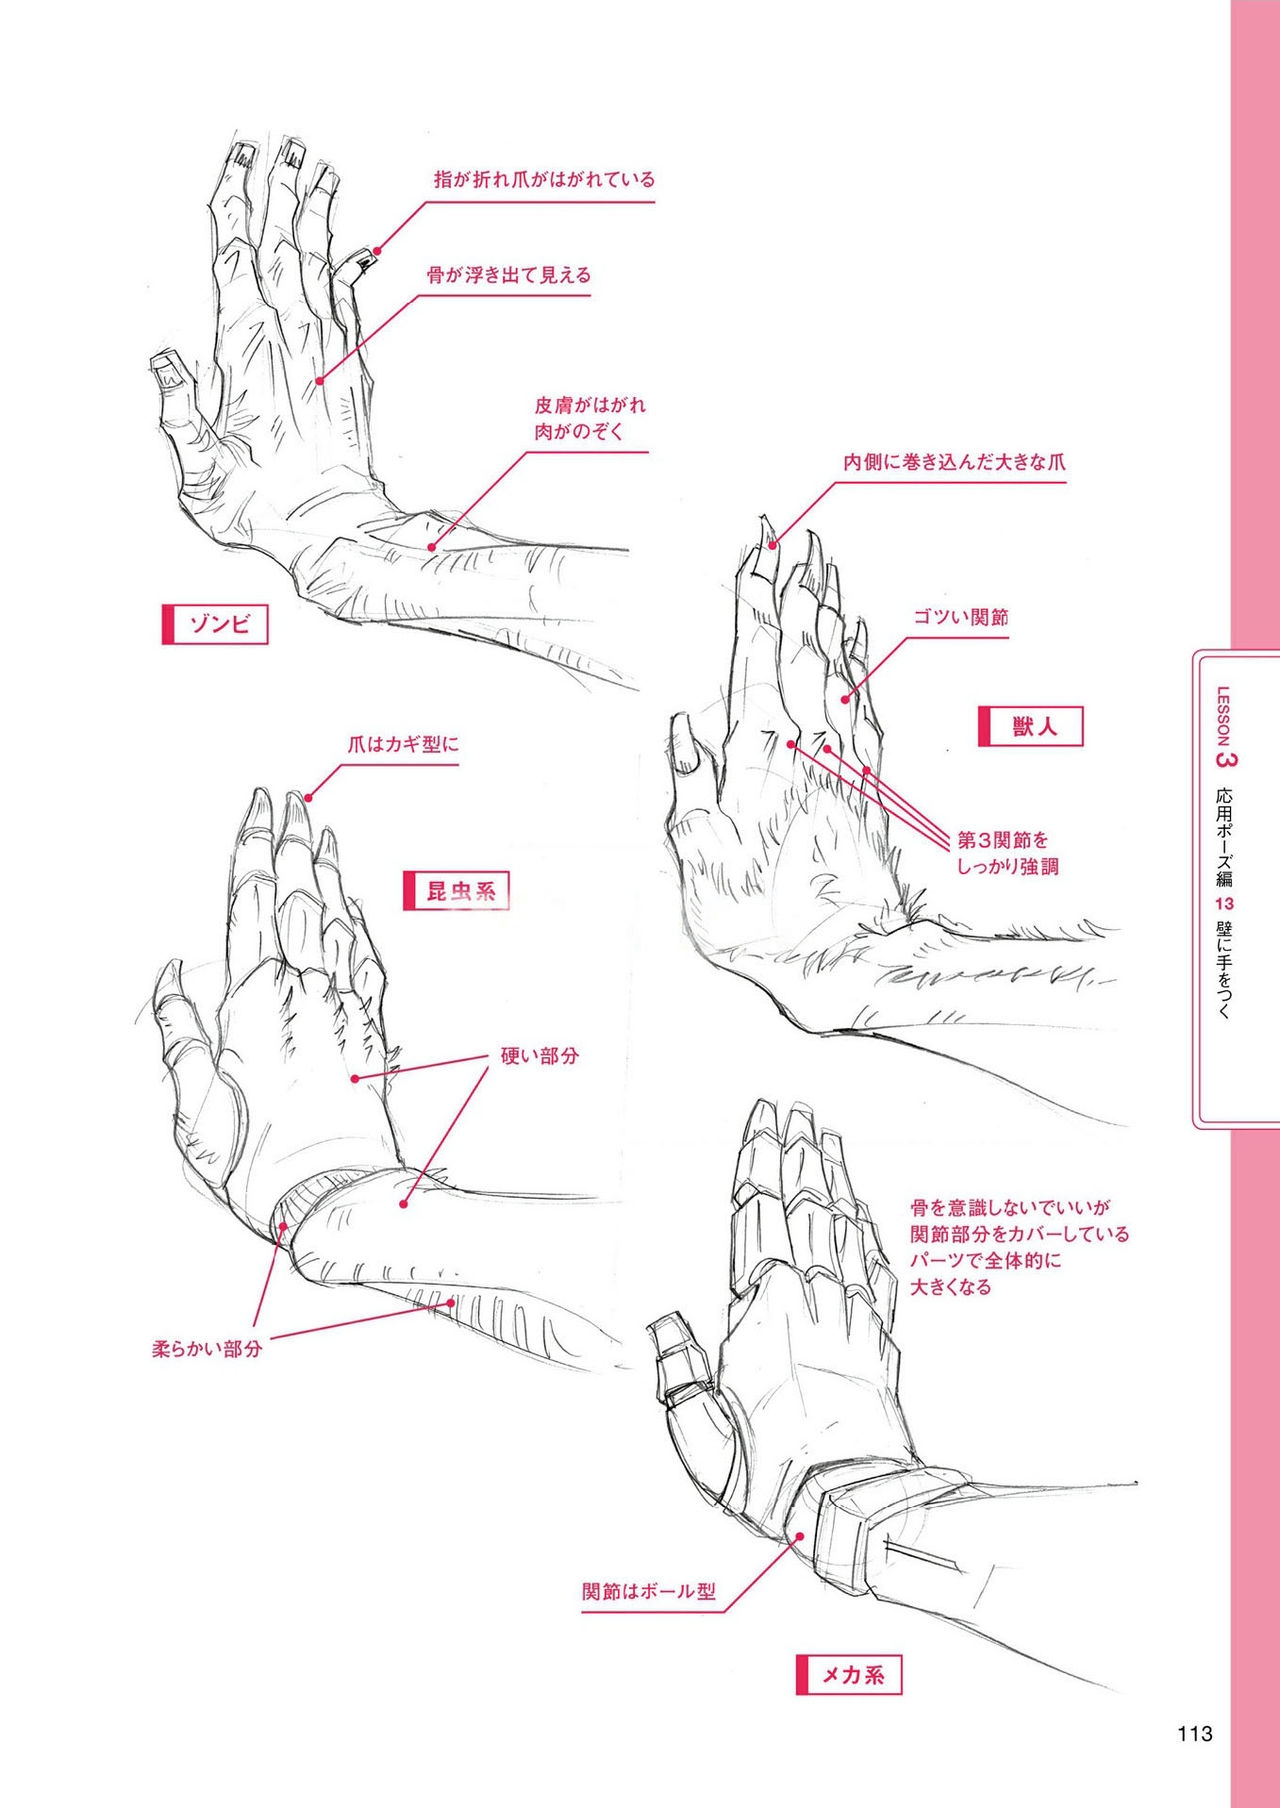 How to draw hands 113